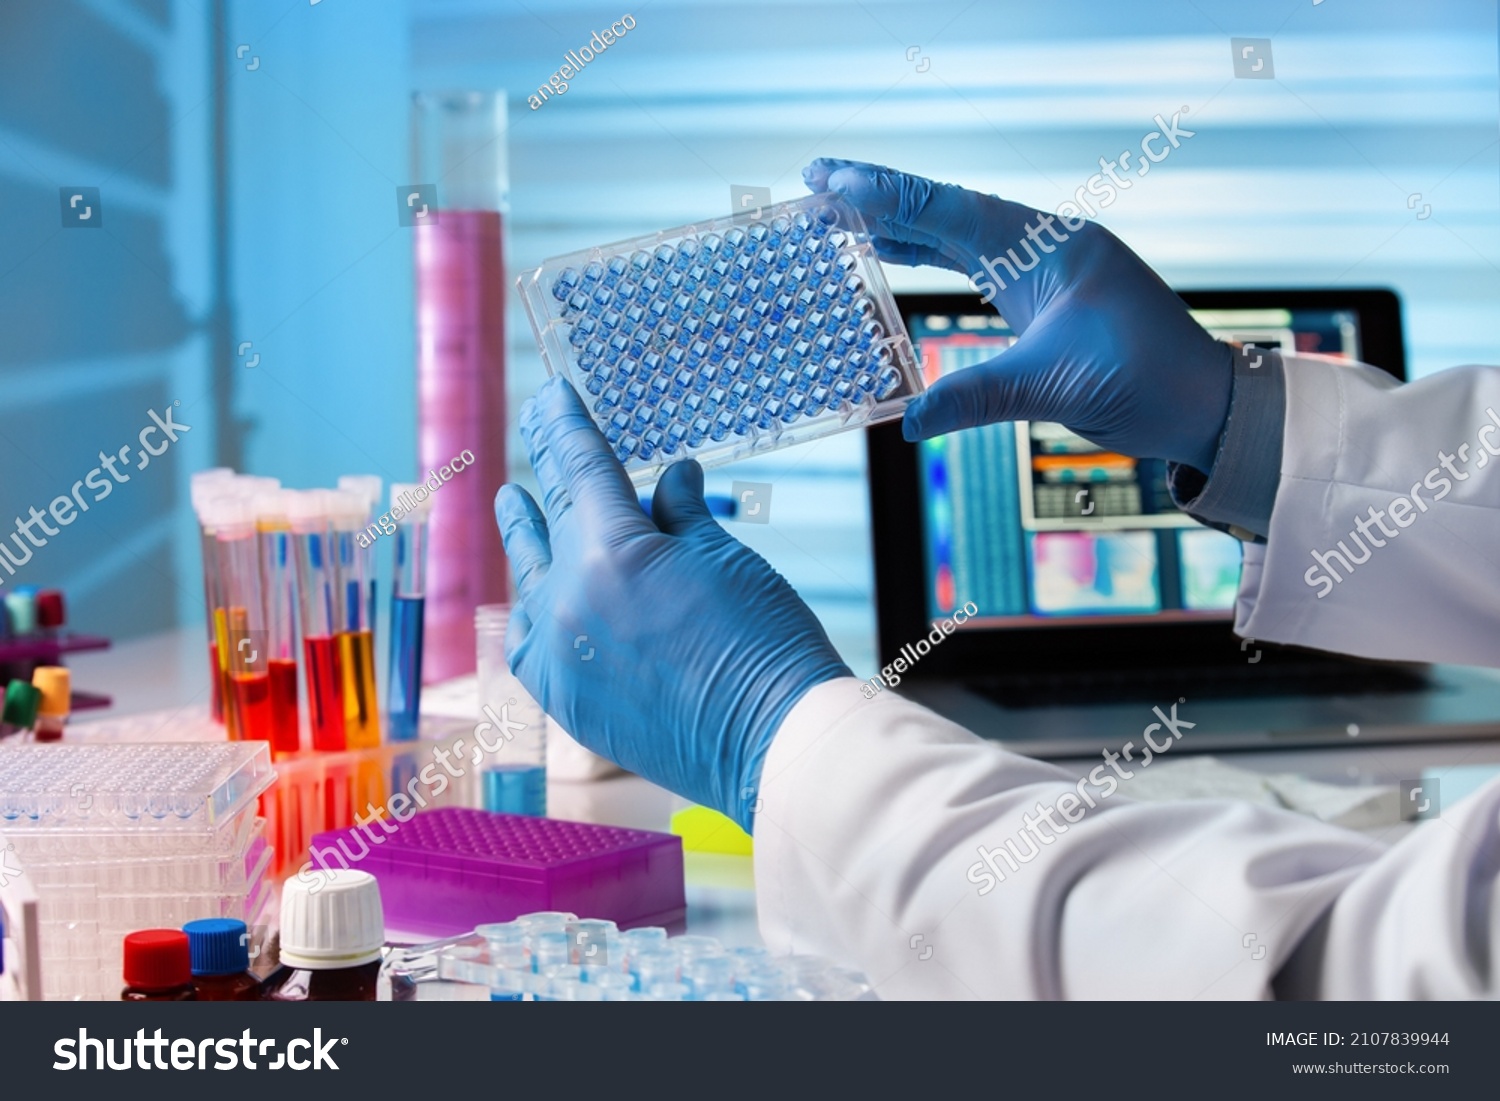 Scientist working in laboratory with samples in micro plate. Researcher in lab holding a 96 well plate with biological samples for analysis #2107839944